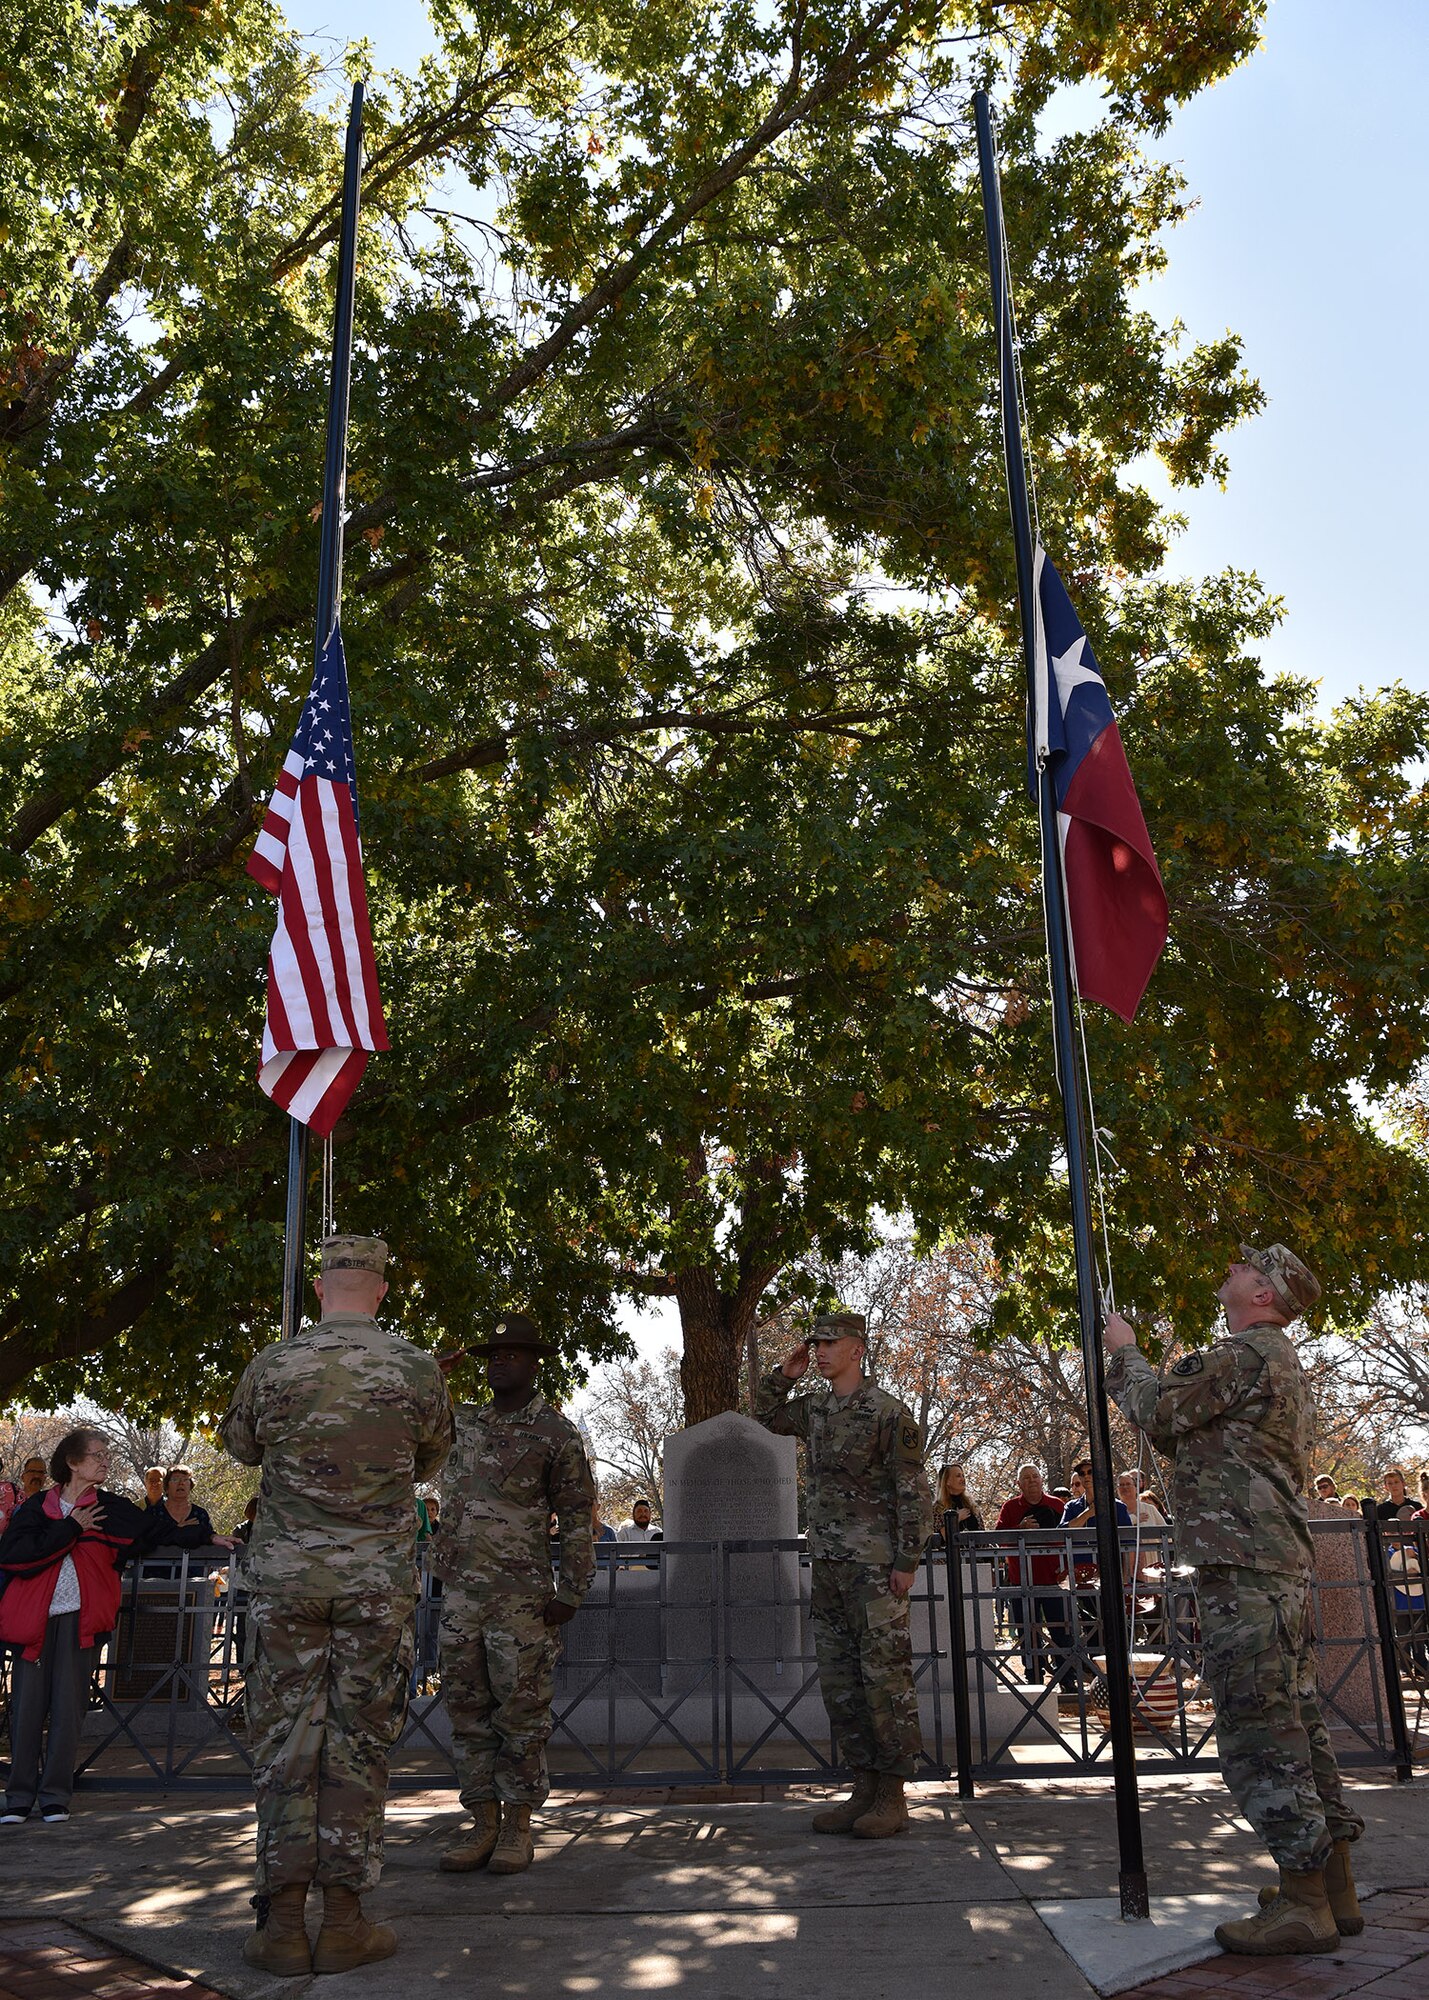 Soldiers assigned to the 344th Military Intelligence Battalion raise the U.S. and Texas state flags during the Veterans Day Parade in Menard, Texas, Nov. 9, 2019. Service members from Goodfellow Air Force Base participated in several local Veterans Day observances, including parades in Menard, Ballinger, and downtown San Angelo. (U.S. Air Force photo by Staff Sgt. Chad Warren/released)